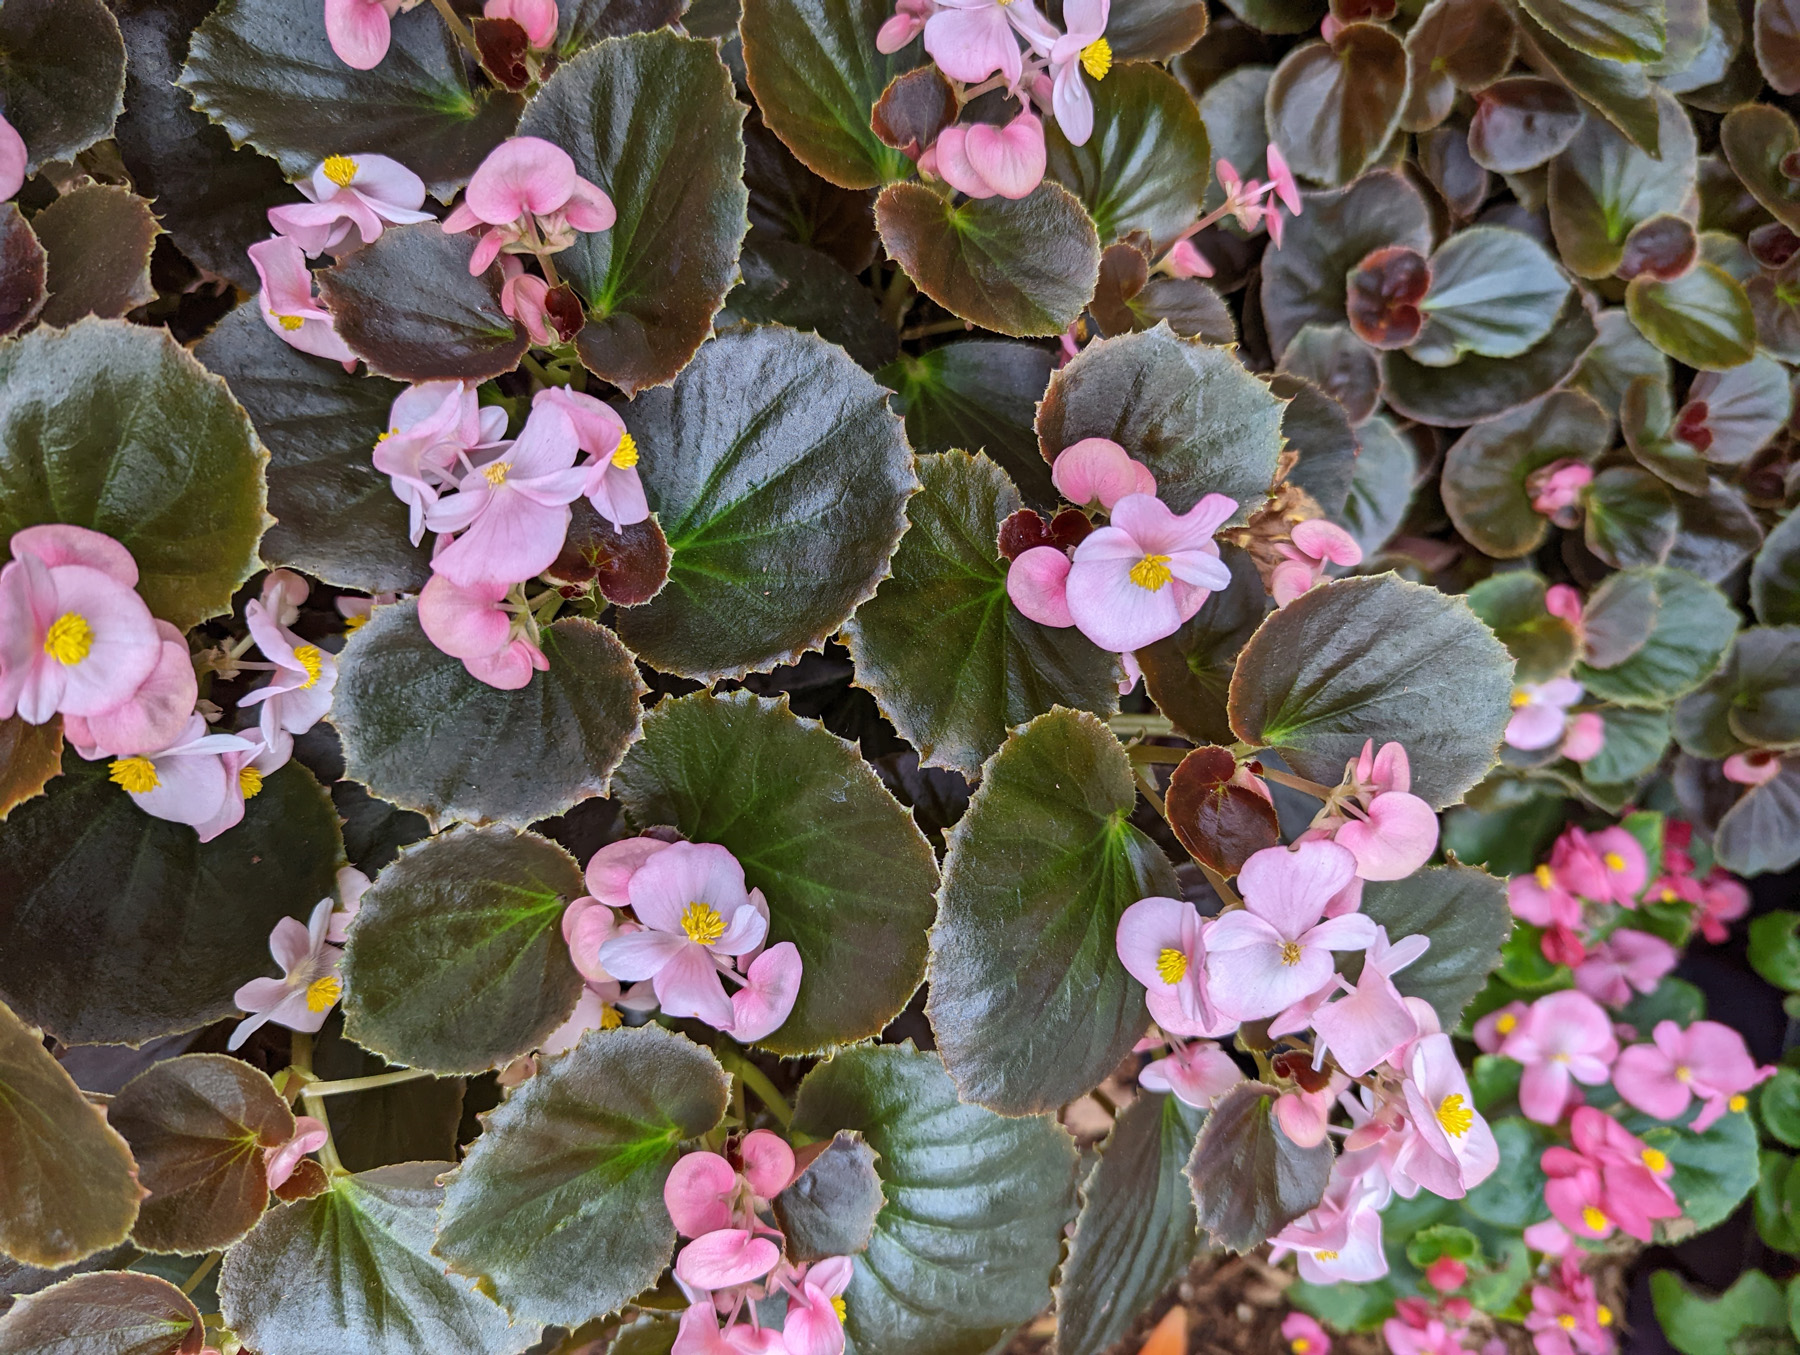 Wax begonias grow quickly, are deer resistant, and spread to fill in spaces in the garden.